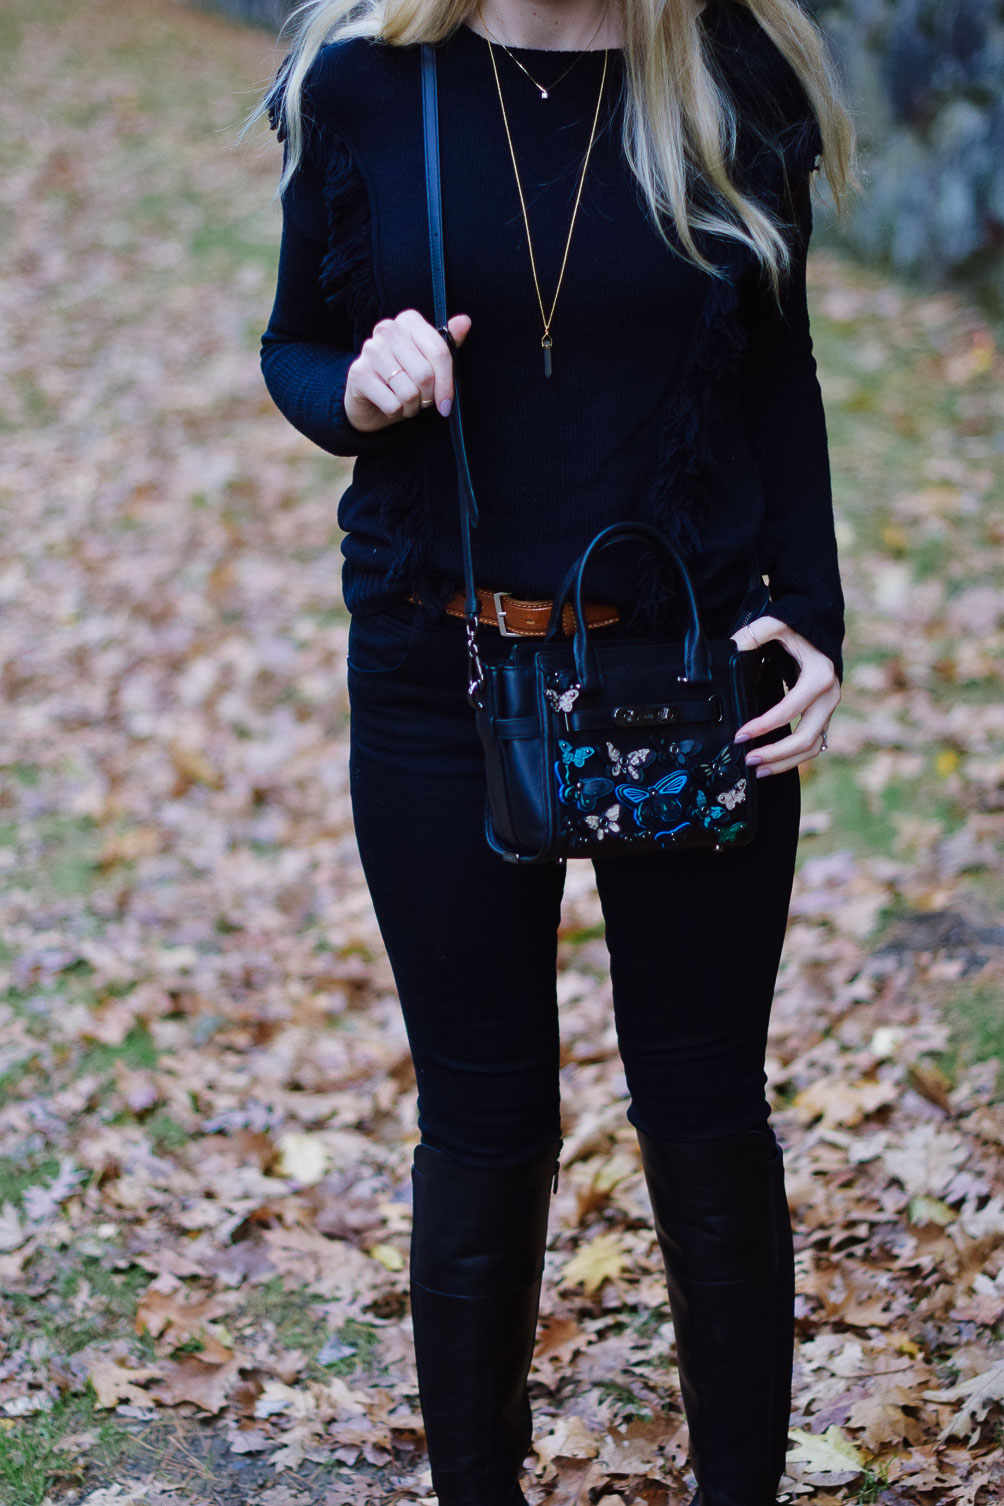 styling black leather riding boots with a monochrome look for fall winter outfit inspiration